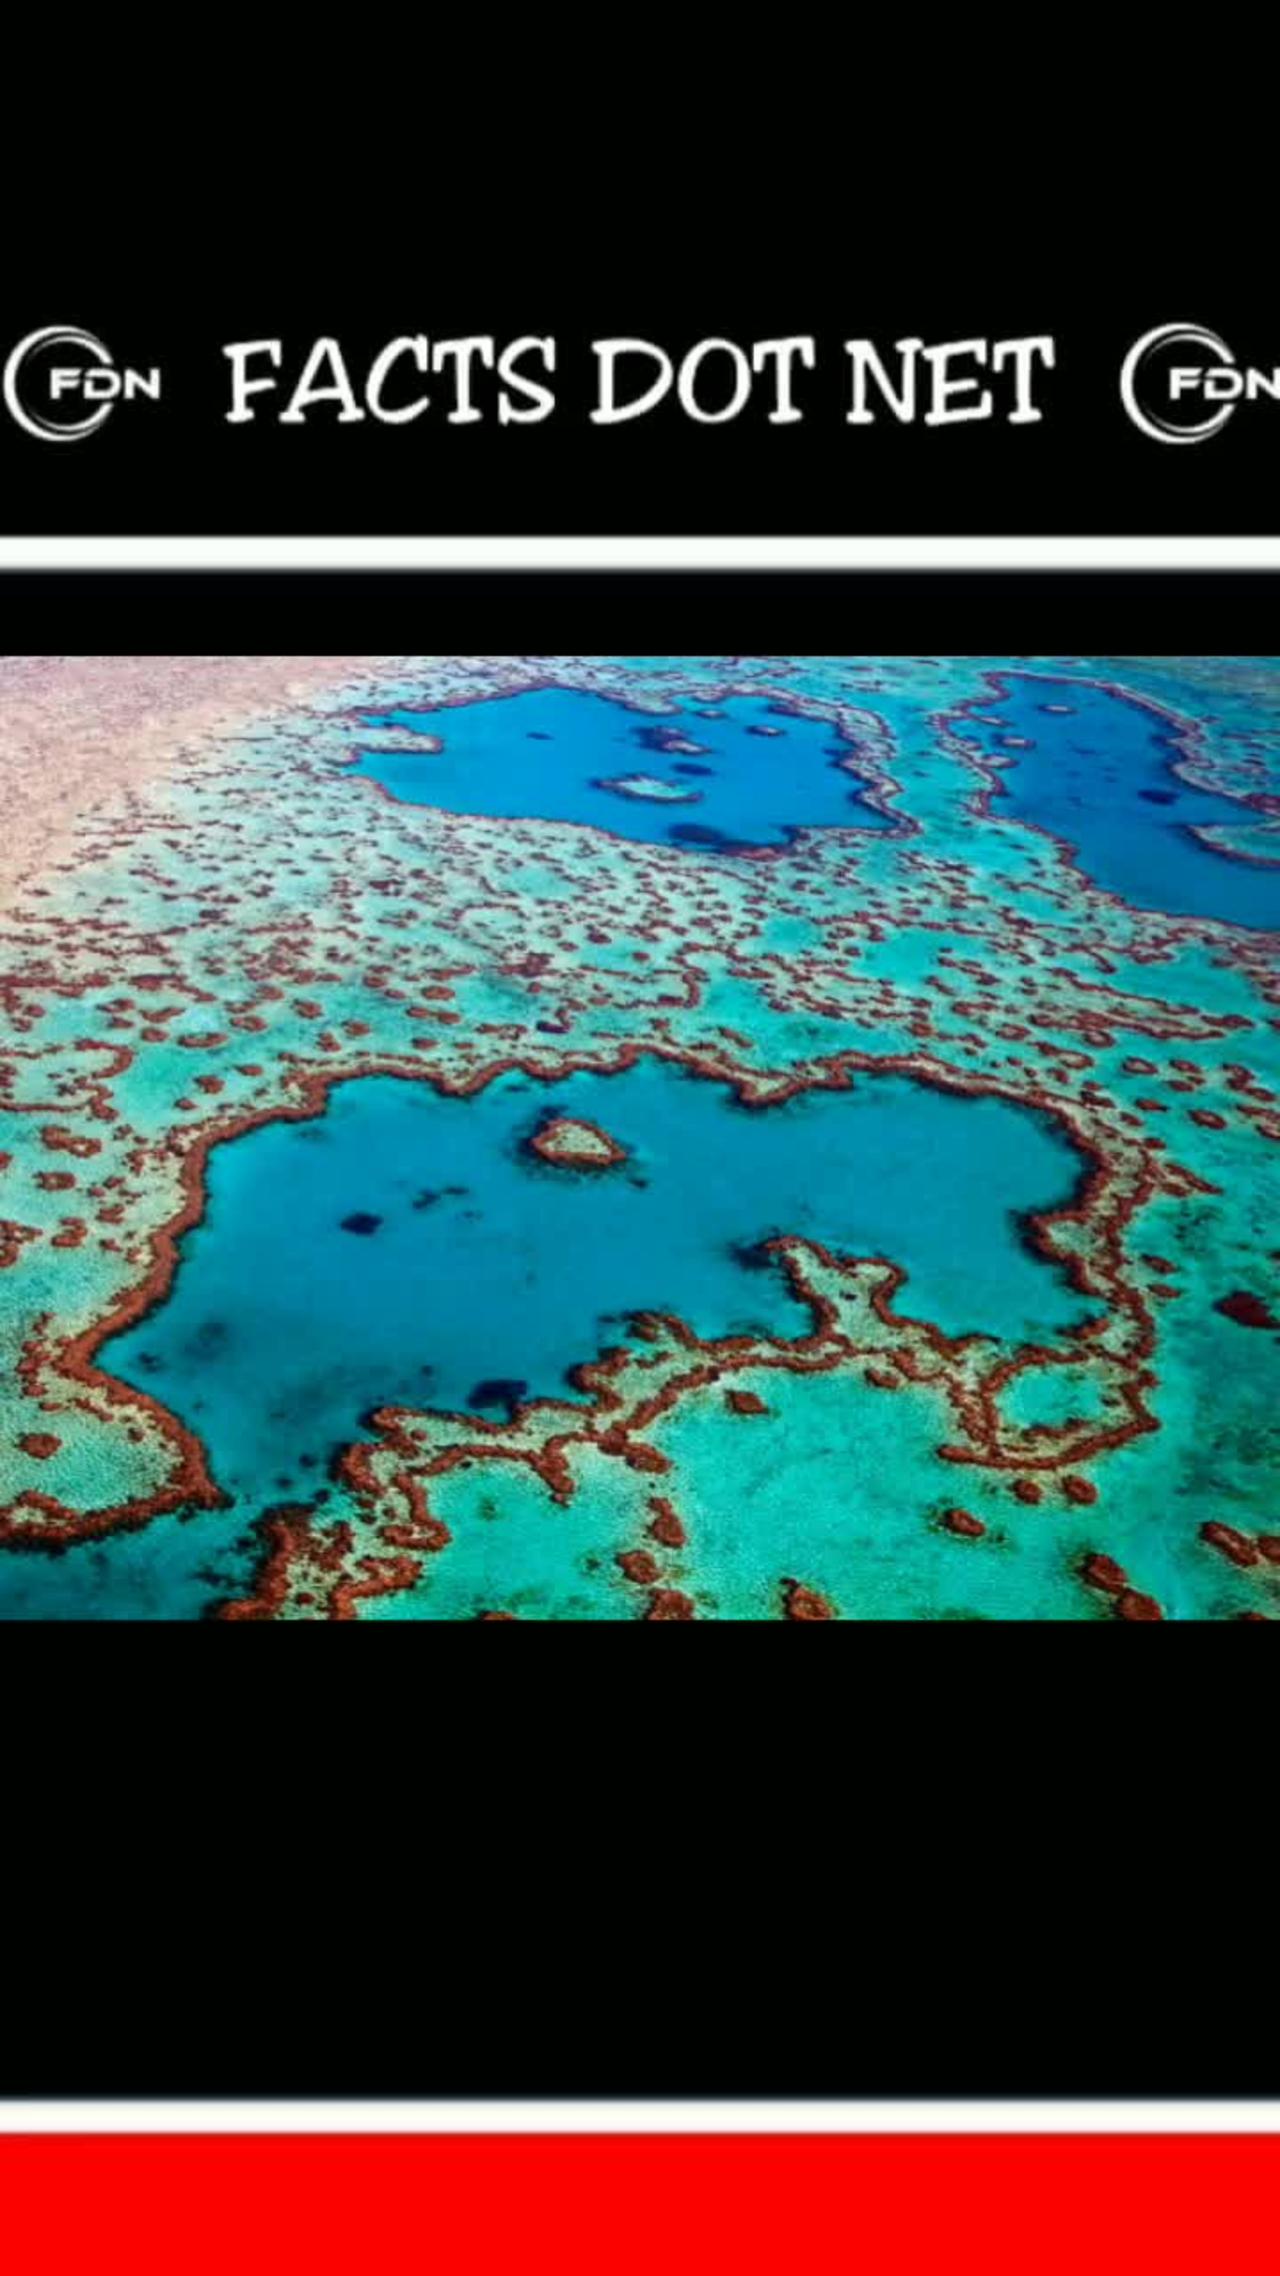 Did you know? Great Barrier Reef, Queensland, Australia